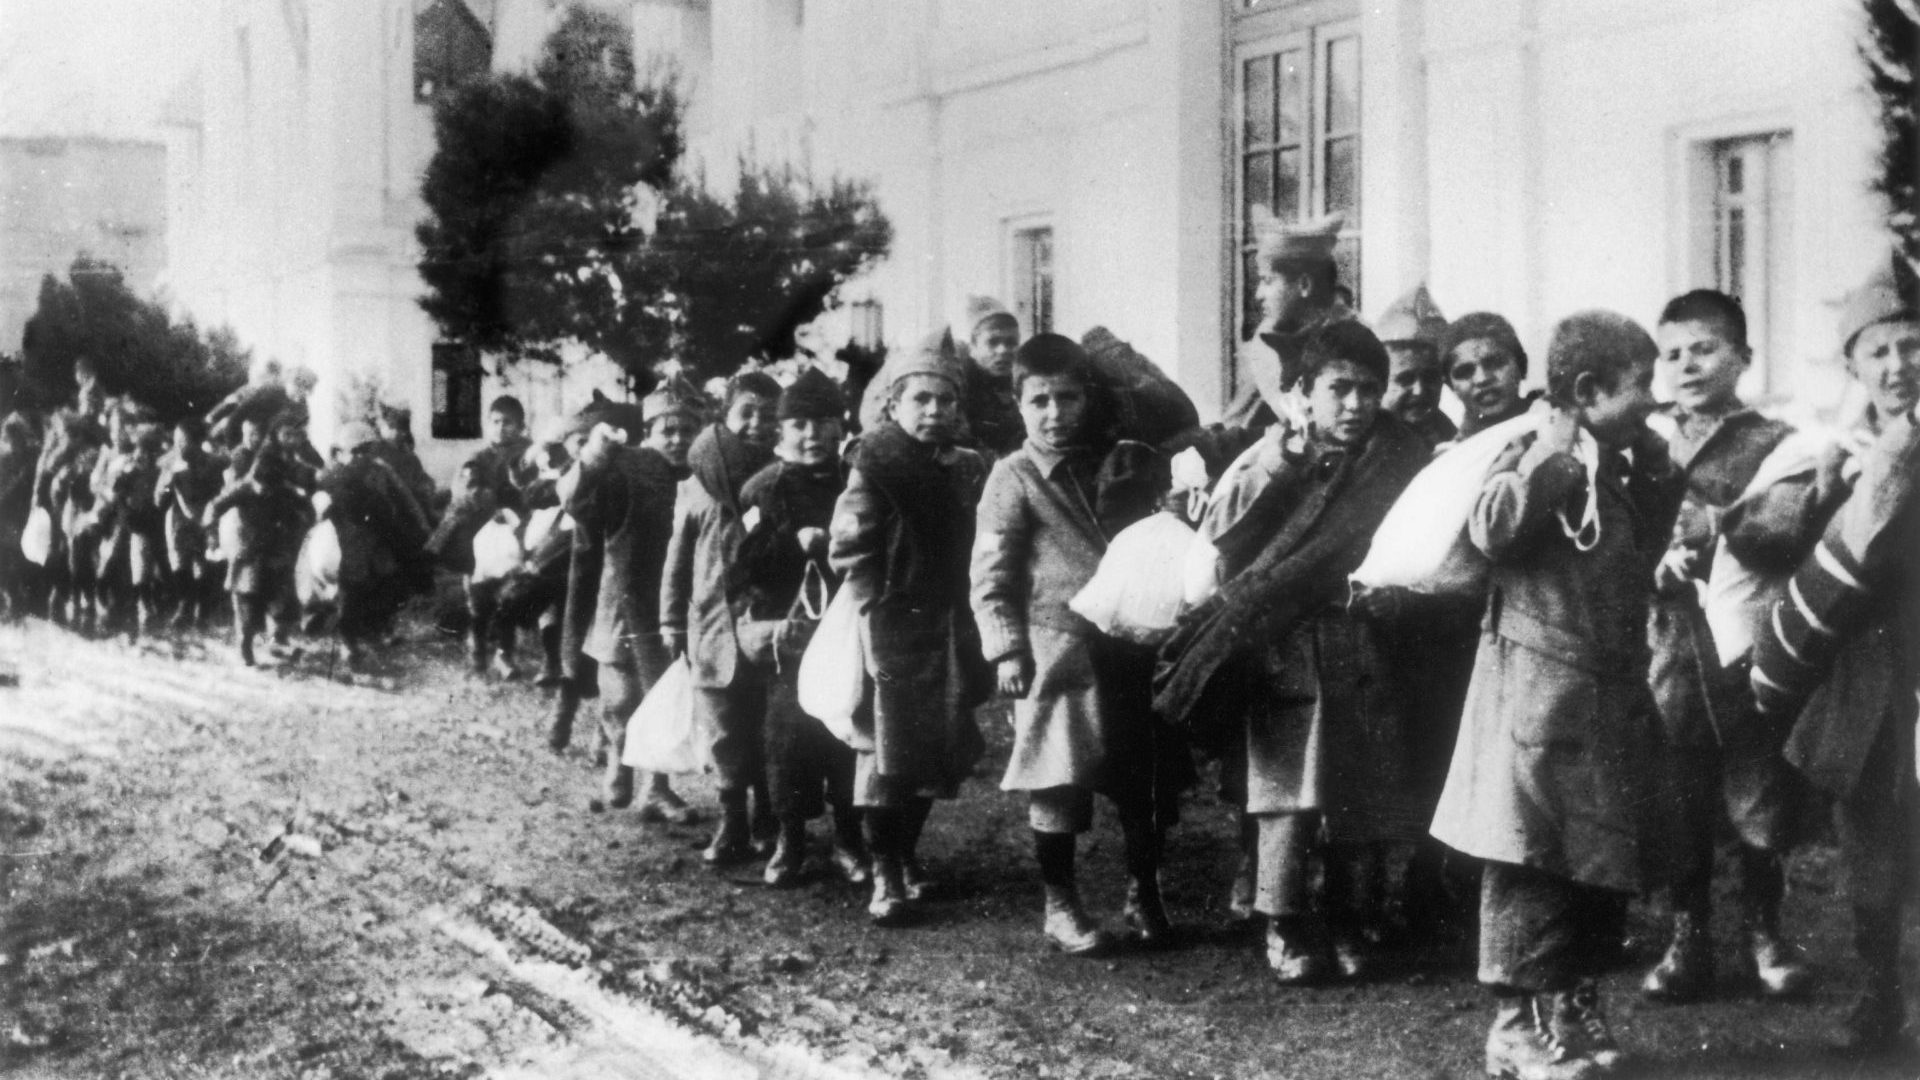 Greek and Armenian children, who saw their parents killed during the 1919-1922 conflict between Greece and Turkey were sent to orphanages. Photo: Keystone-France/Gamma-Keystone via Getty Images